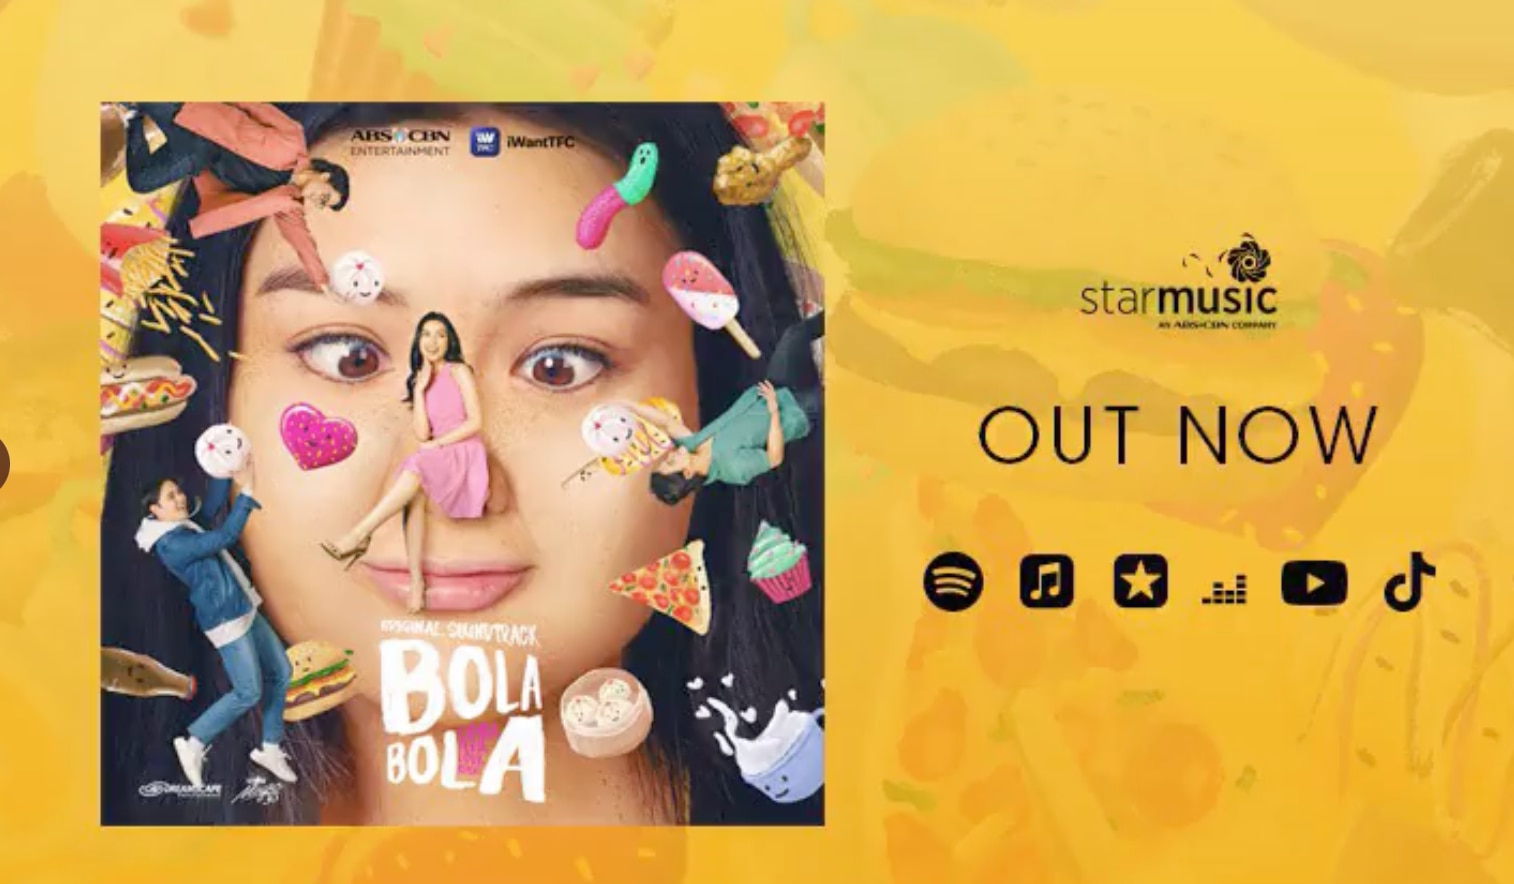 BGYO and KD drop songs on love and realization in "Bola Bola" EP